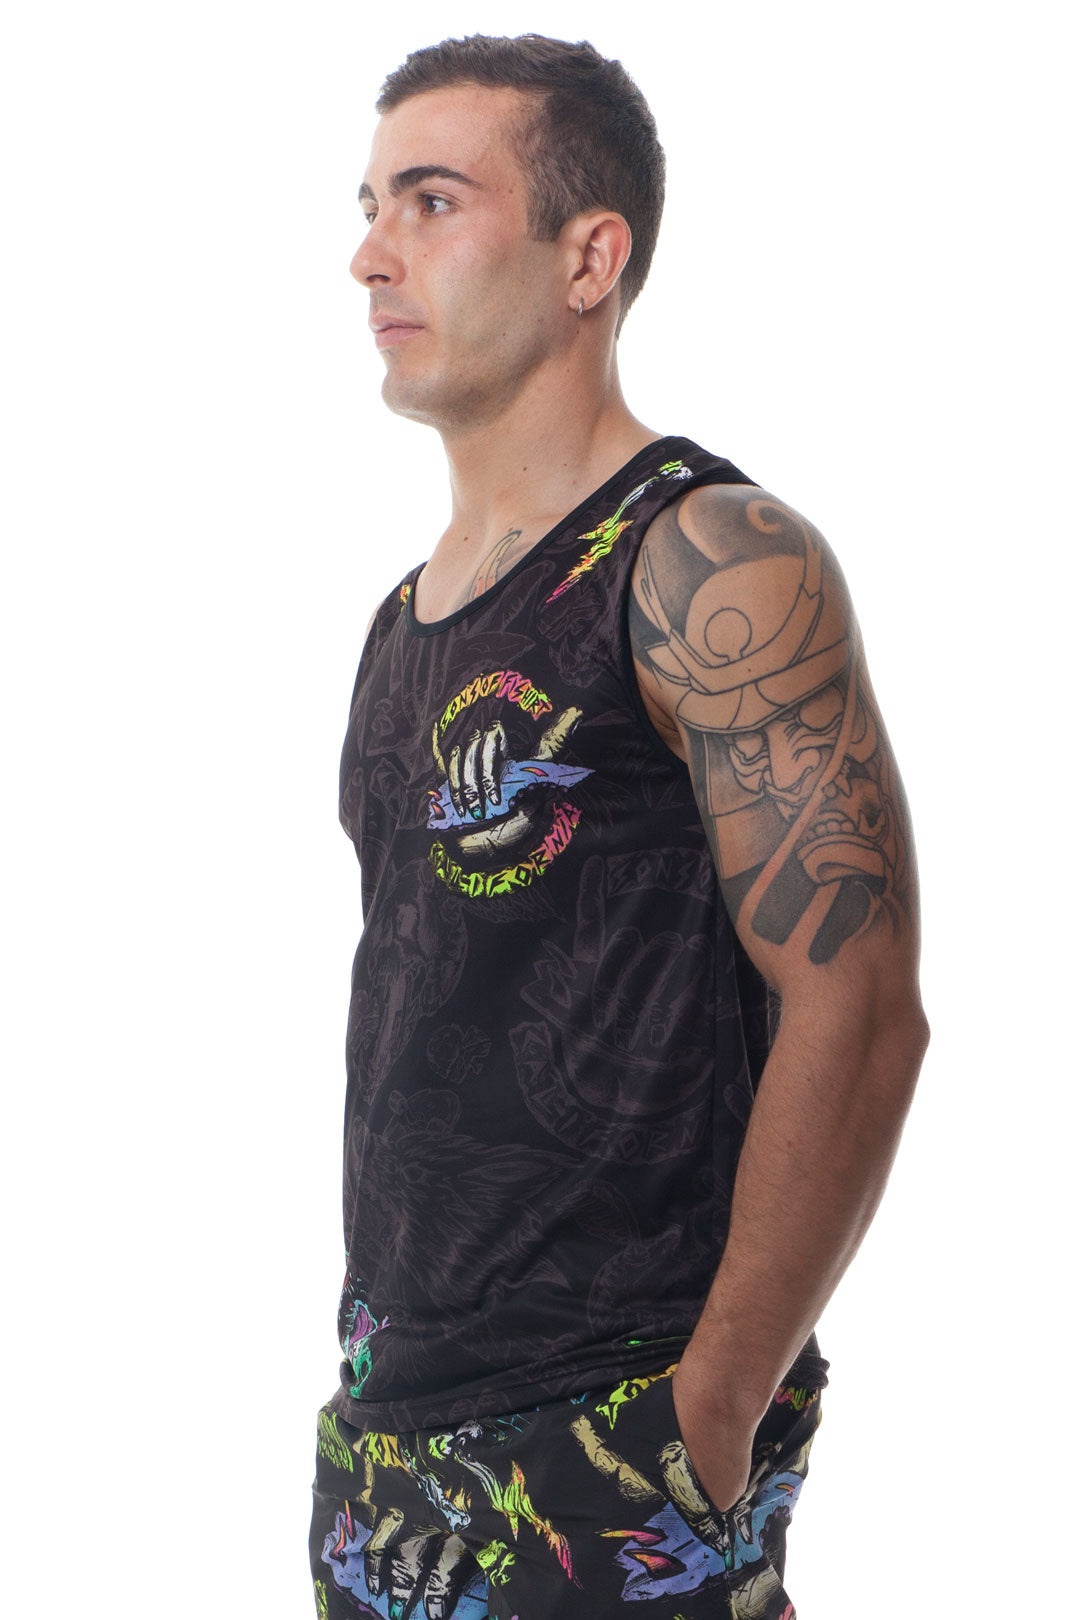 Sons fitness tank top